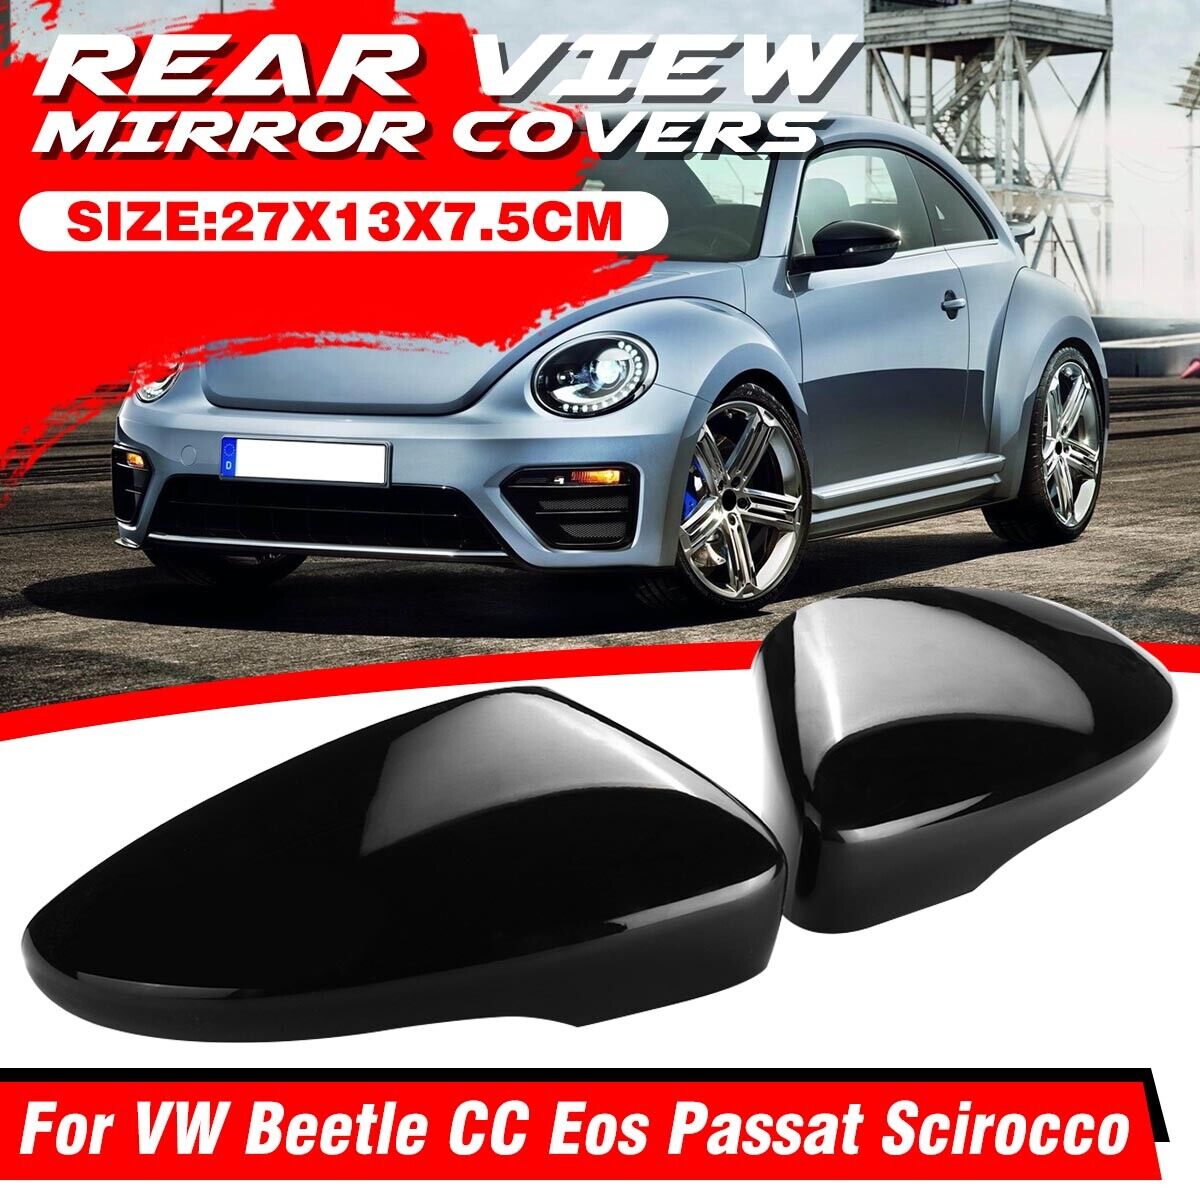 Rear View Side Mirror Cover Caps Glossy Black For VW Beetle CC SCIROCCO 2009-17